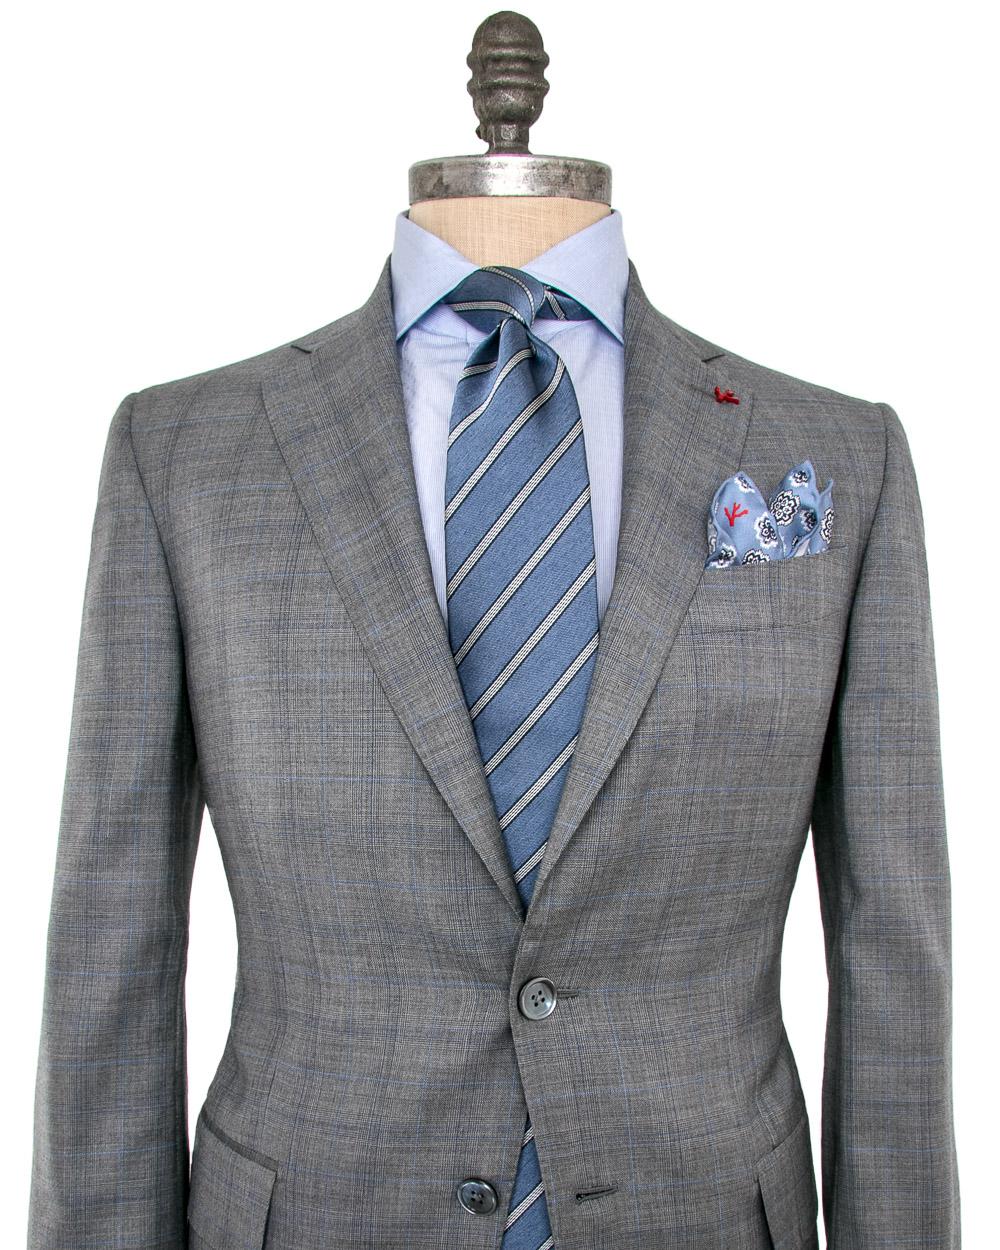 Isaia Wool Grey Glen Plaid With Blue Windowpane Suit in Gray for Men - Lyst